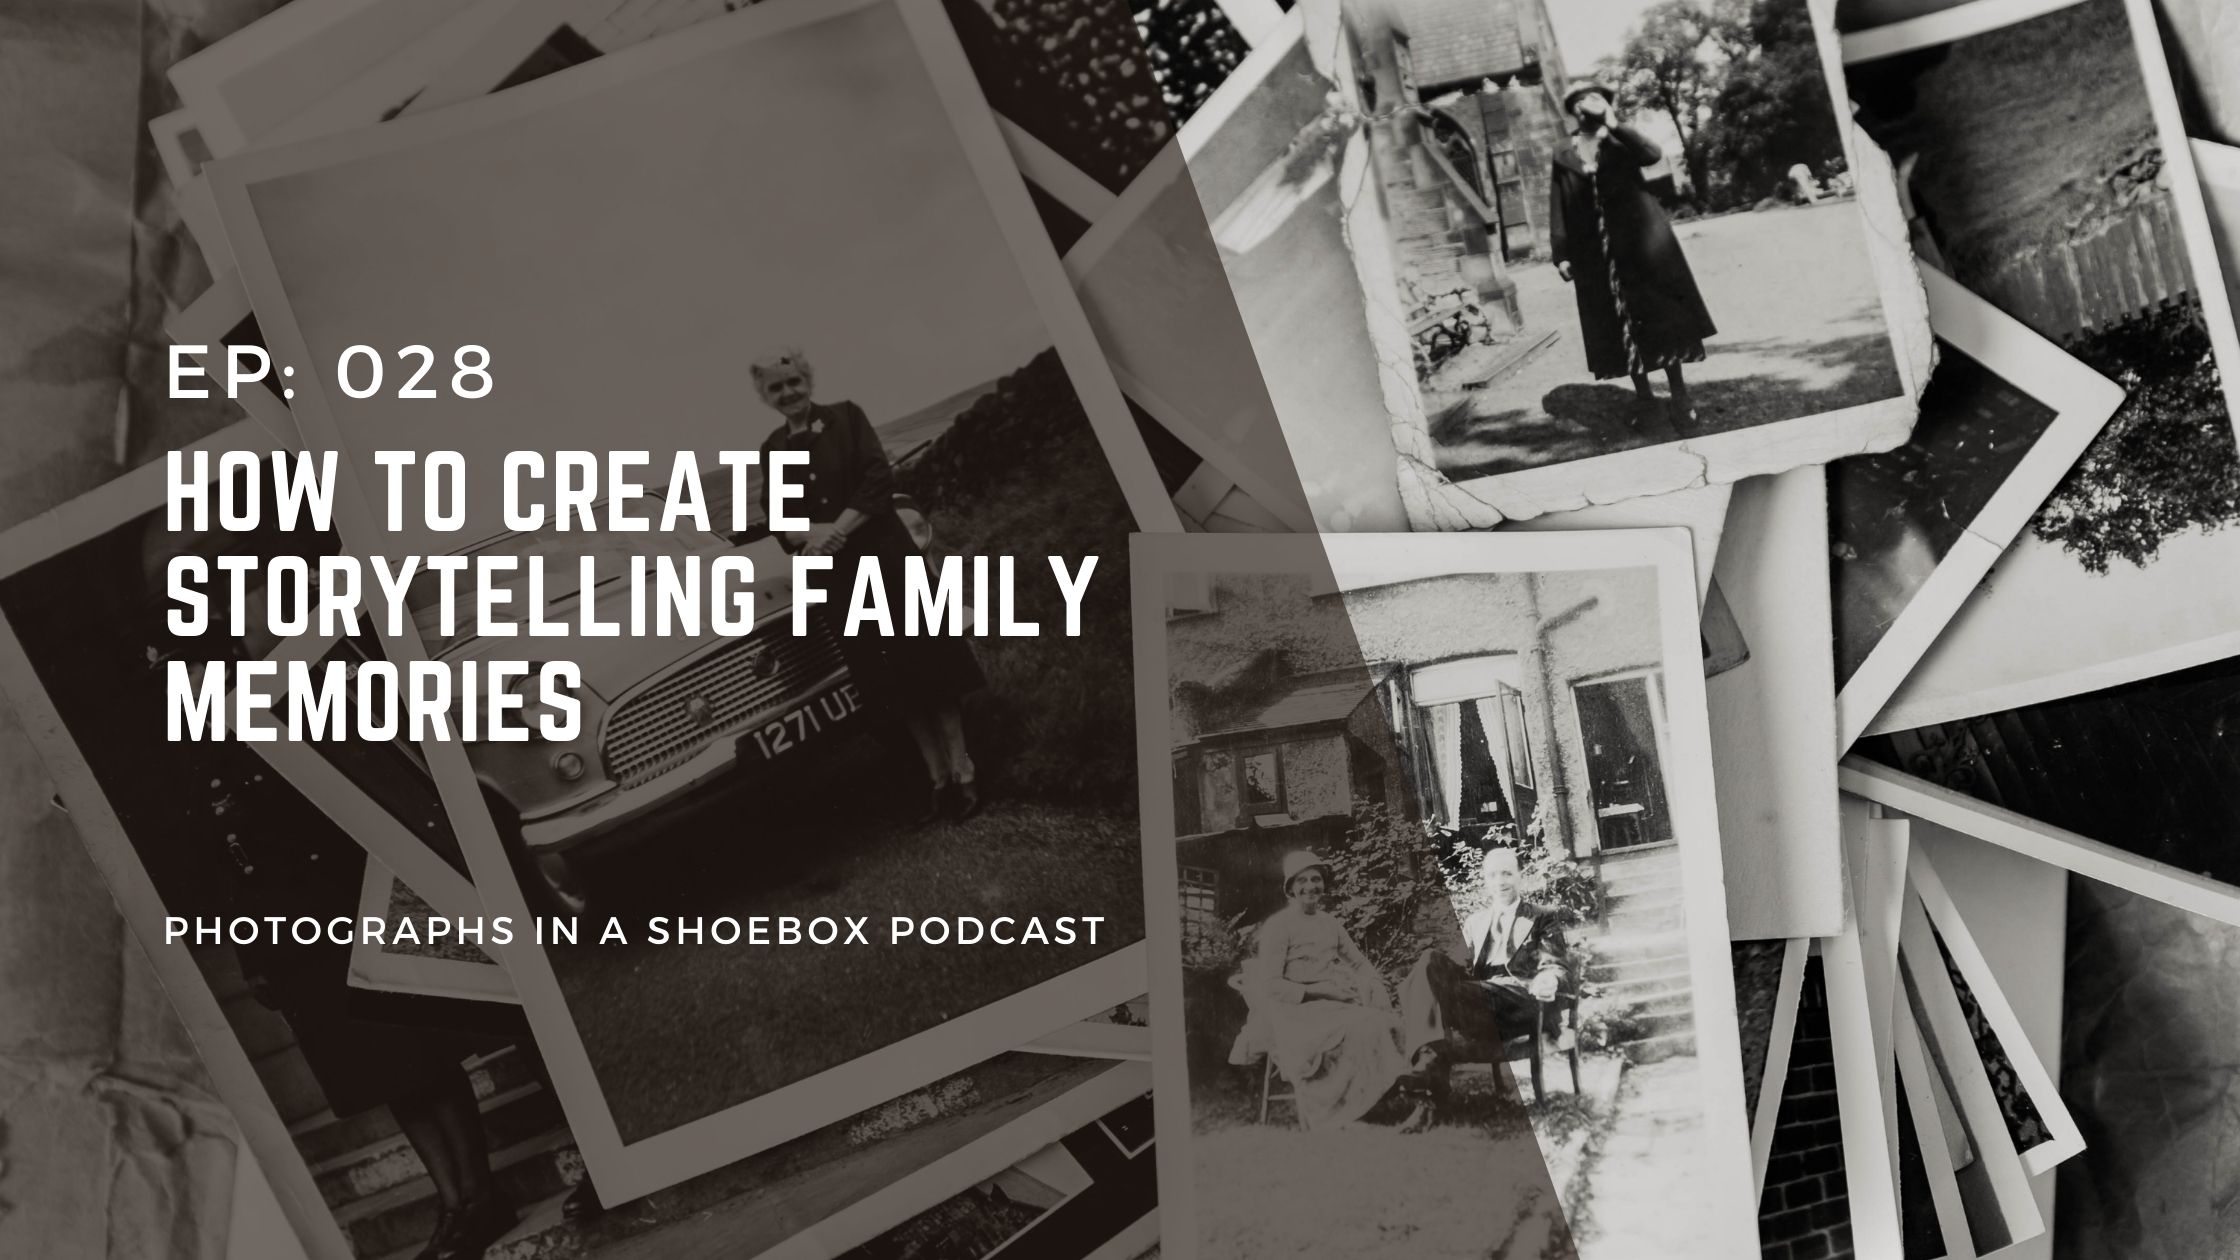 Header image for podcast episode 28 - how to create story telling family memories